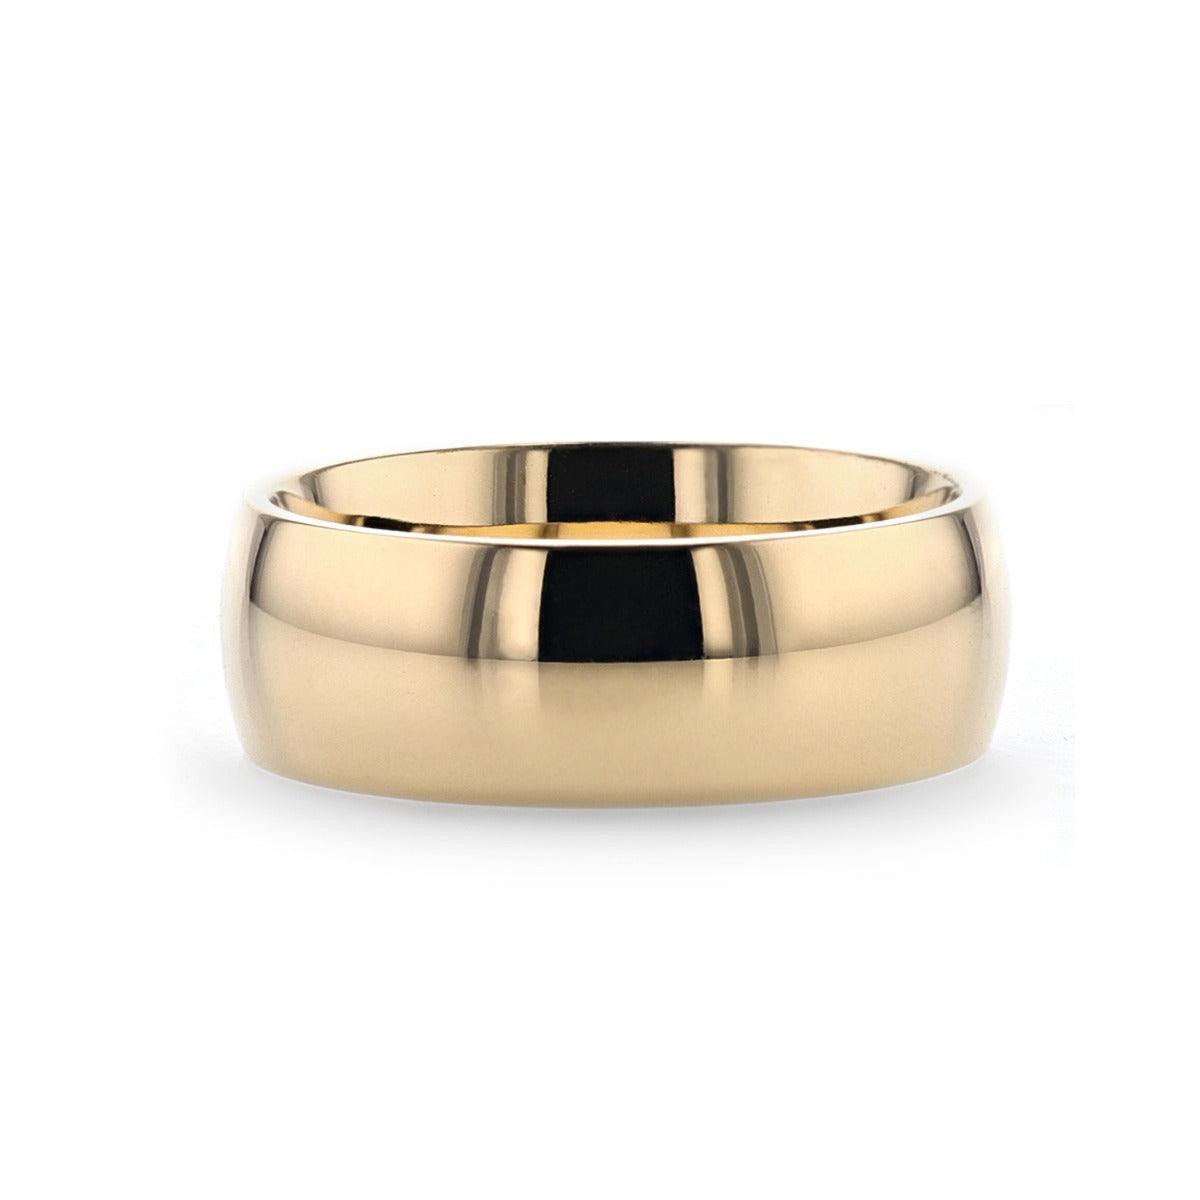 VANNA - Traditional Domed Gold Plated Titanium Wedding Ring - 8mm - The Rutile Ltd